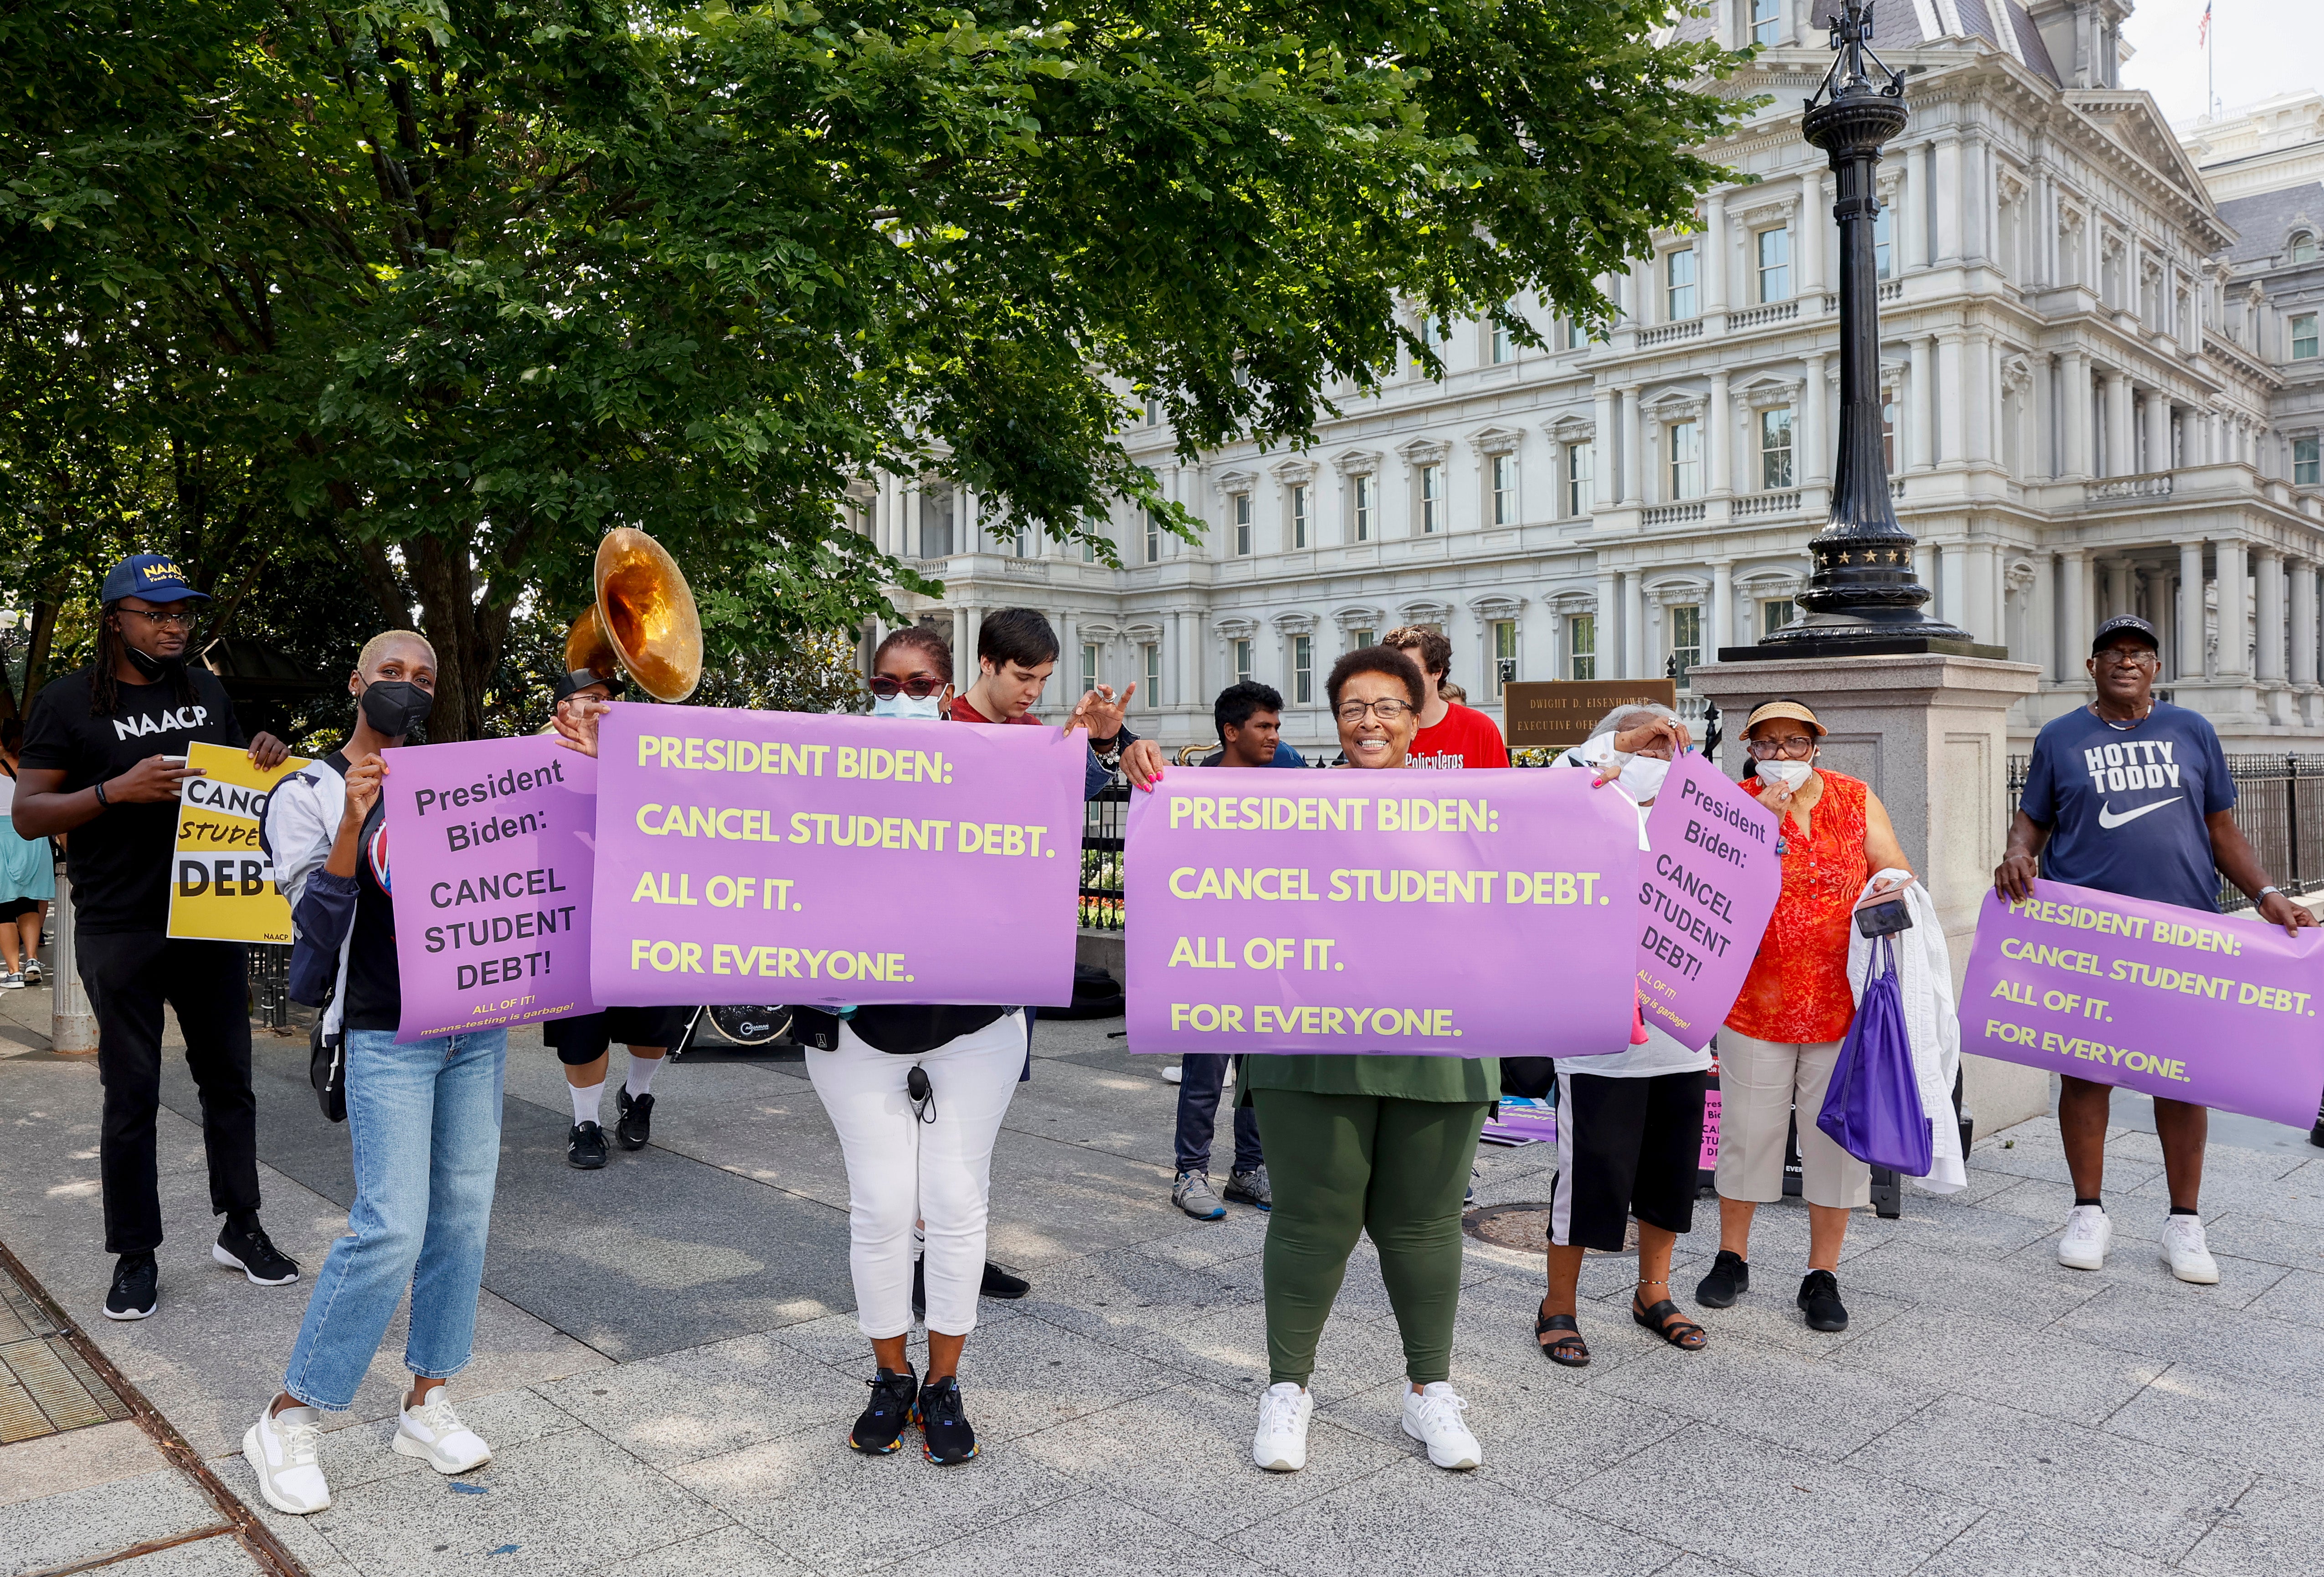 Student loan debt relief advocates hold a demonstration outside the White House in July 2022.